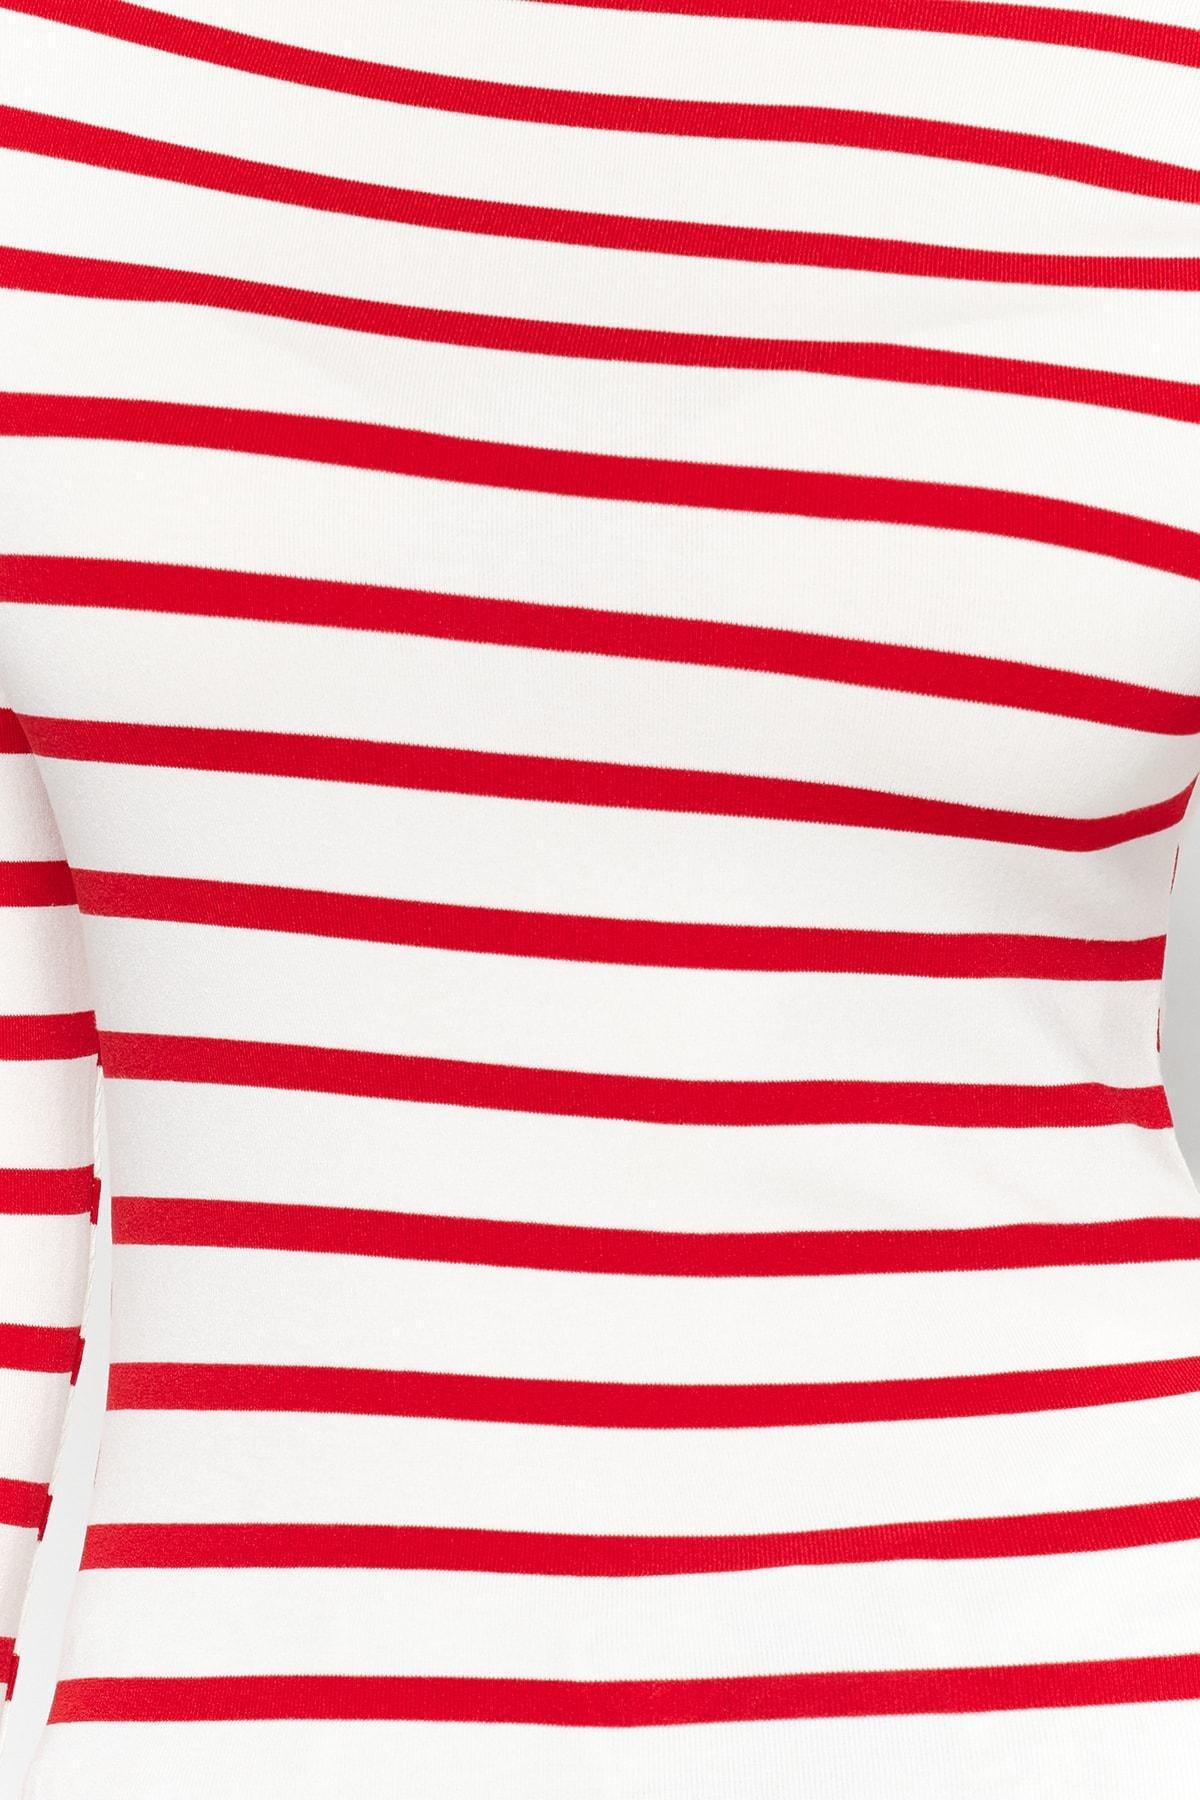 Trendyol - Red Striped Collared Knitted Blouse